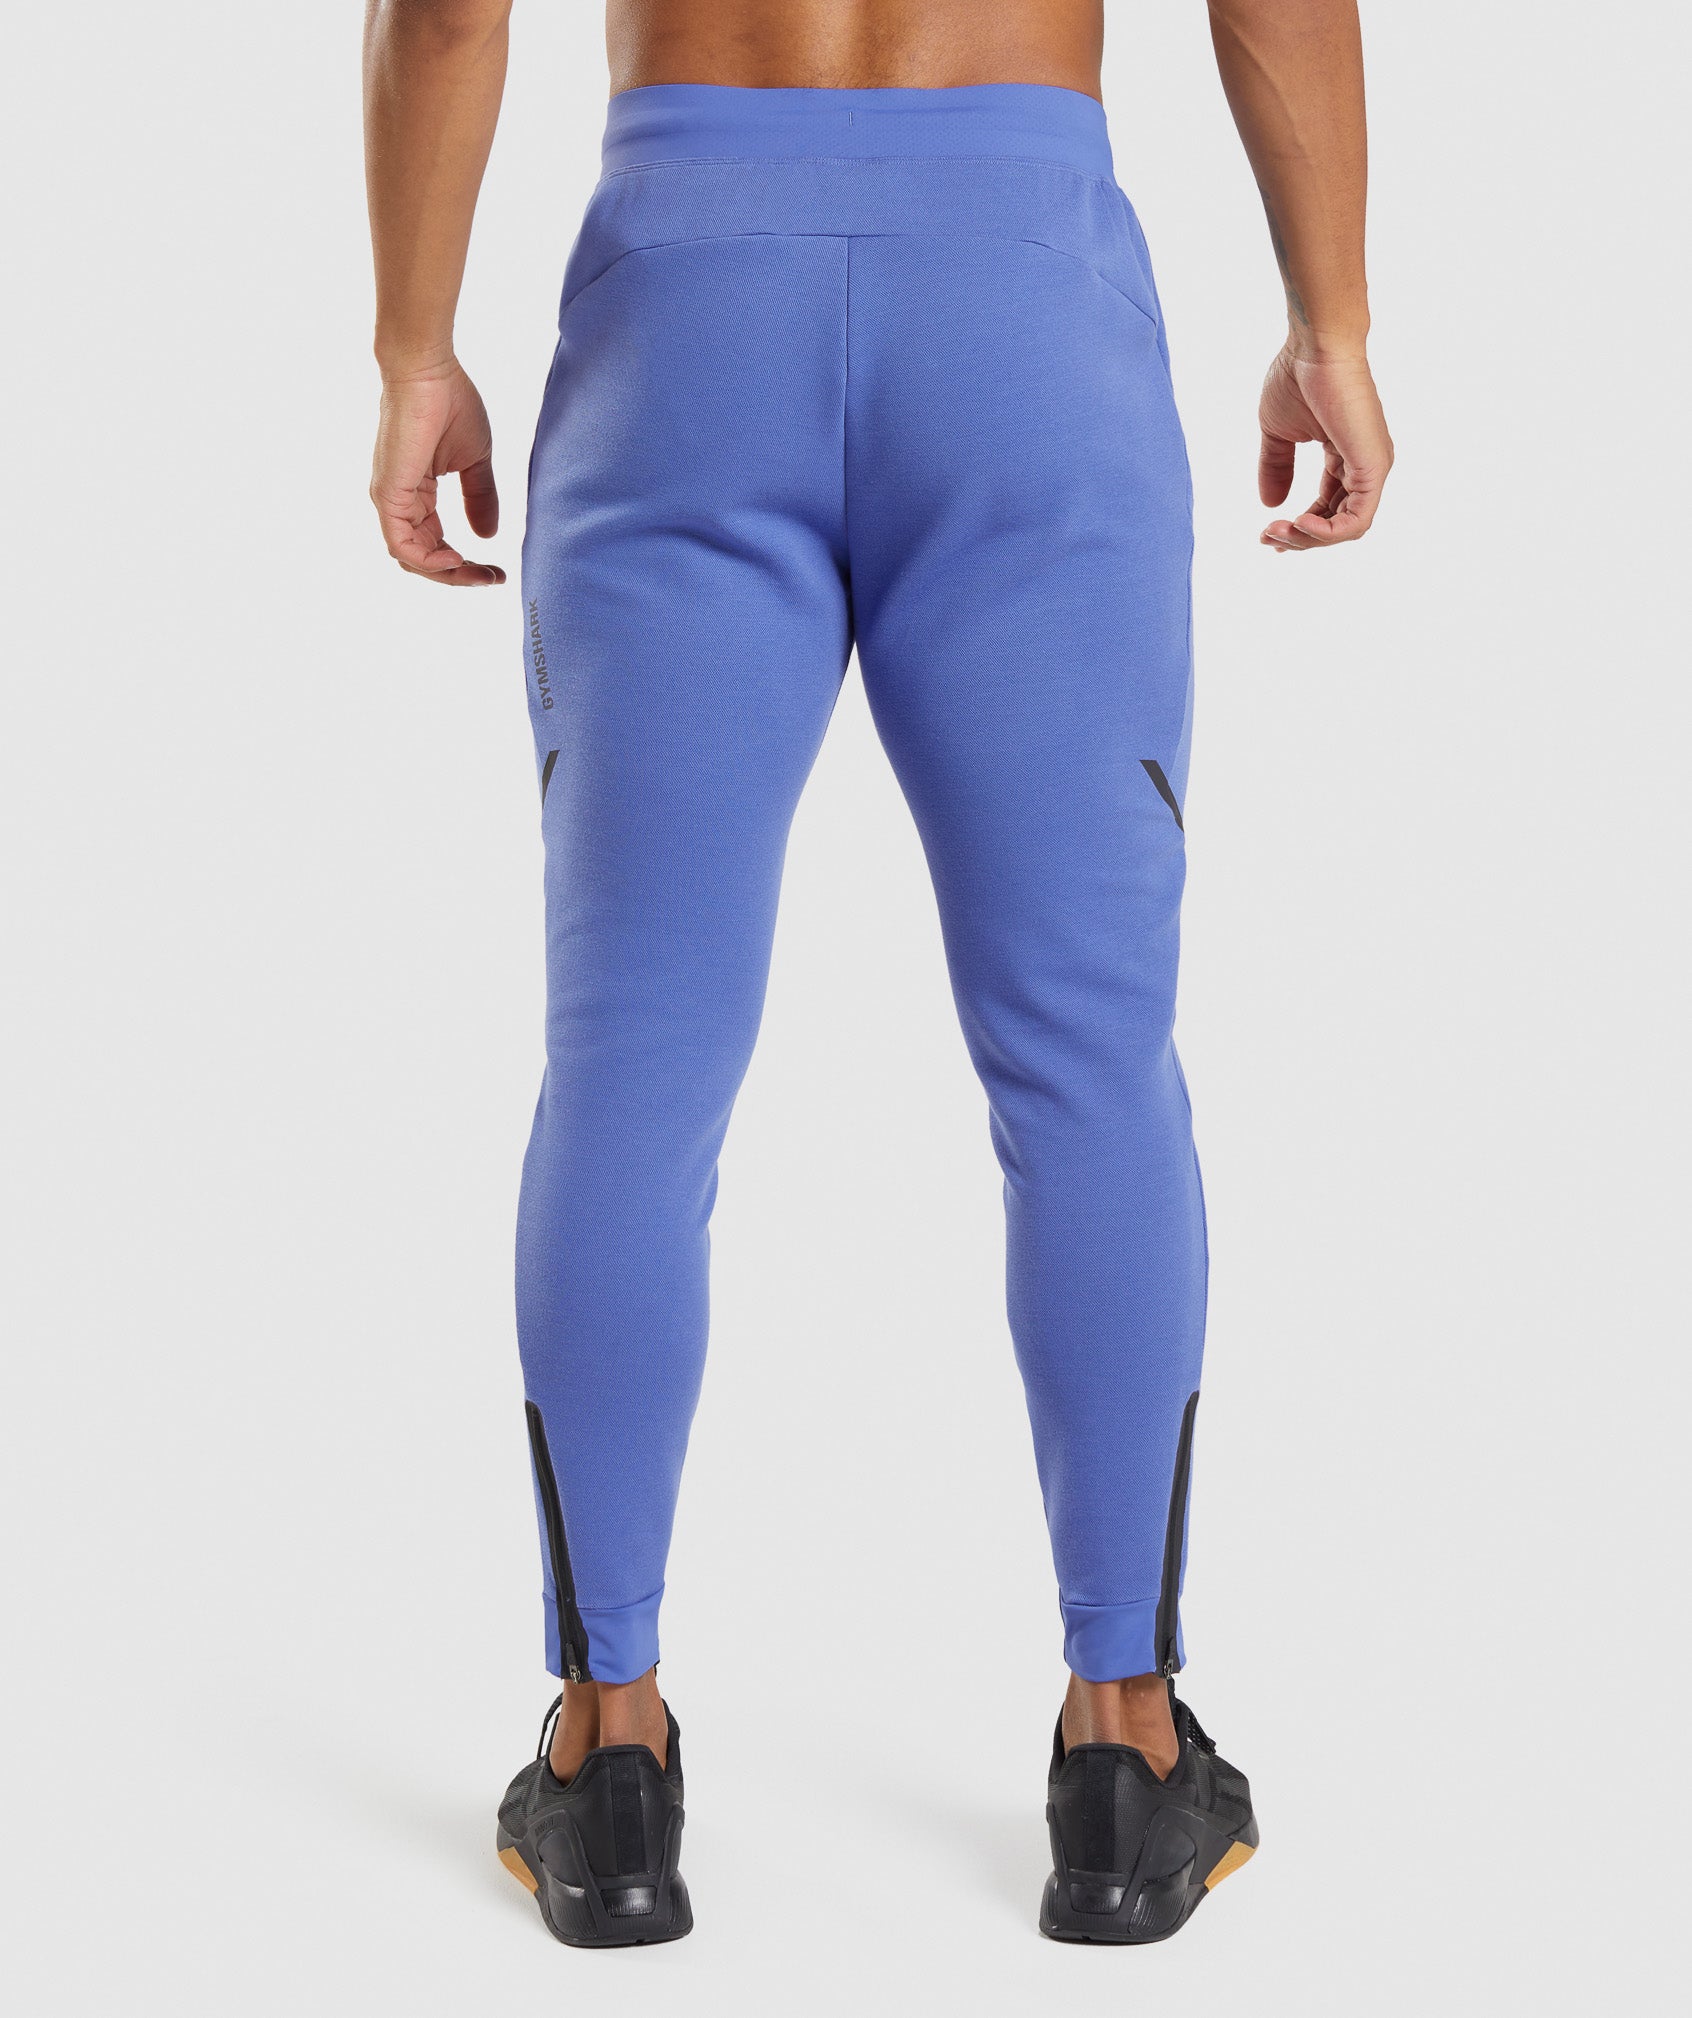 Apex Technical Joggers in Court Blue - view 2